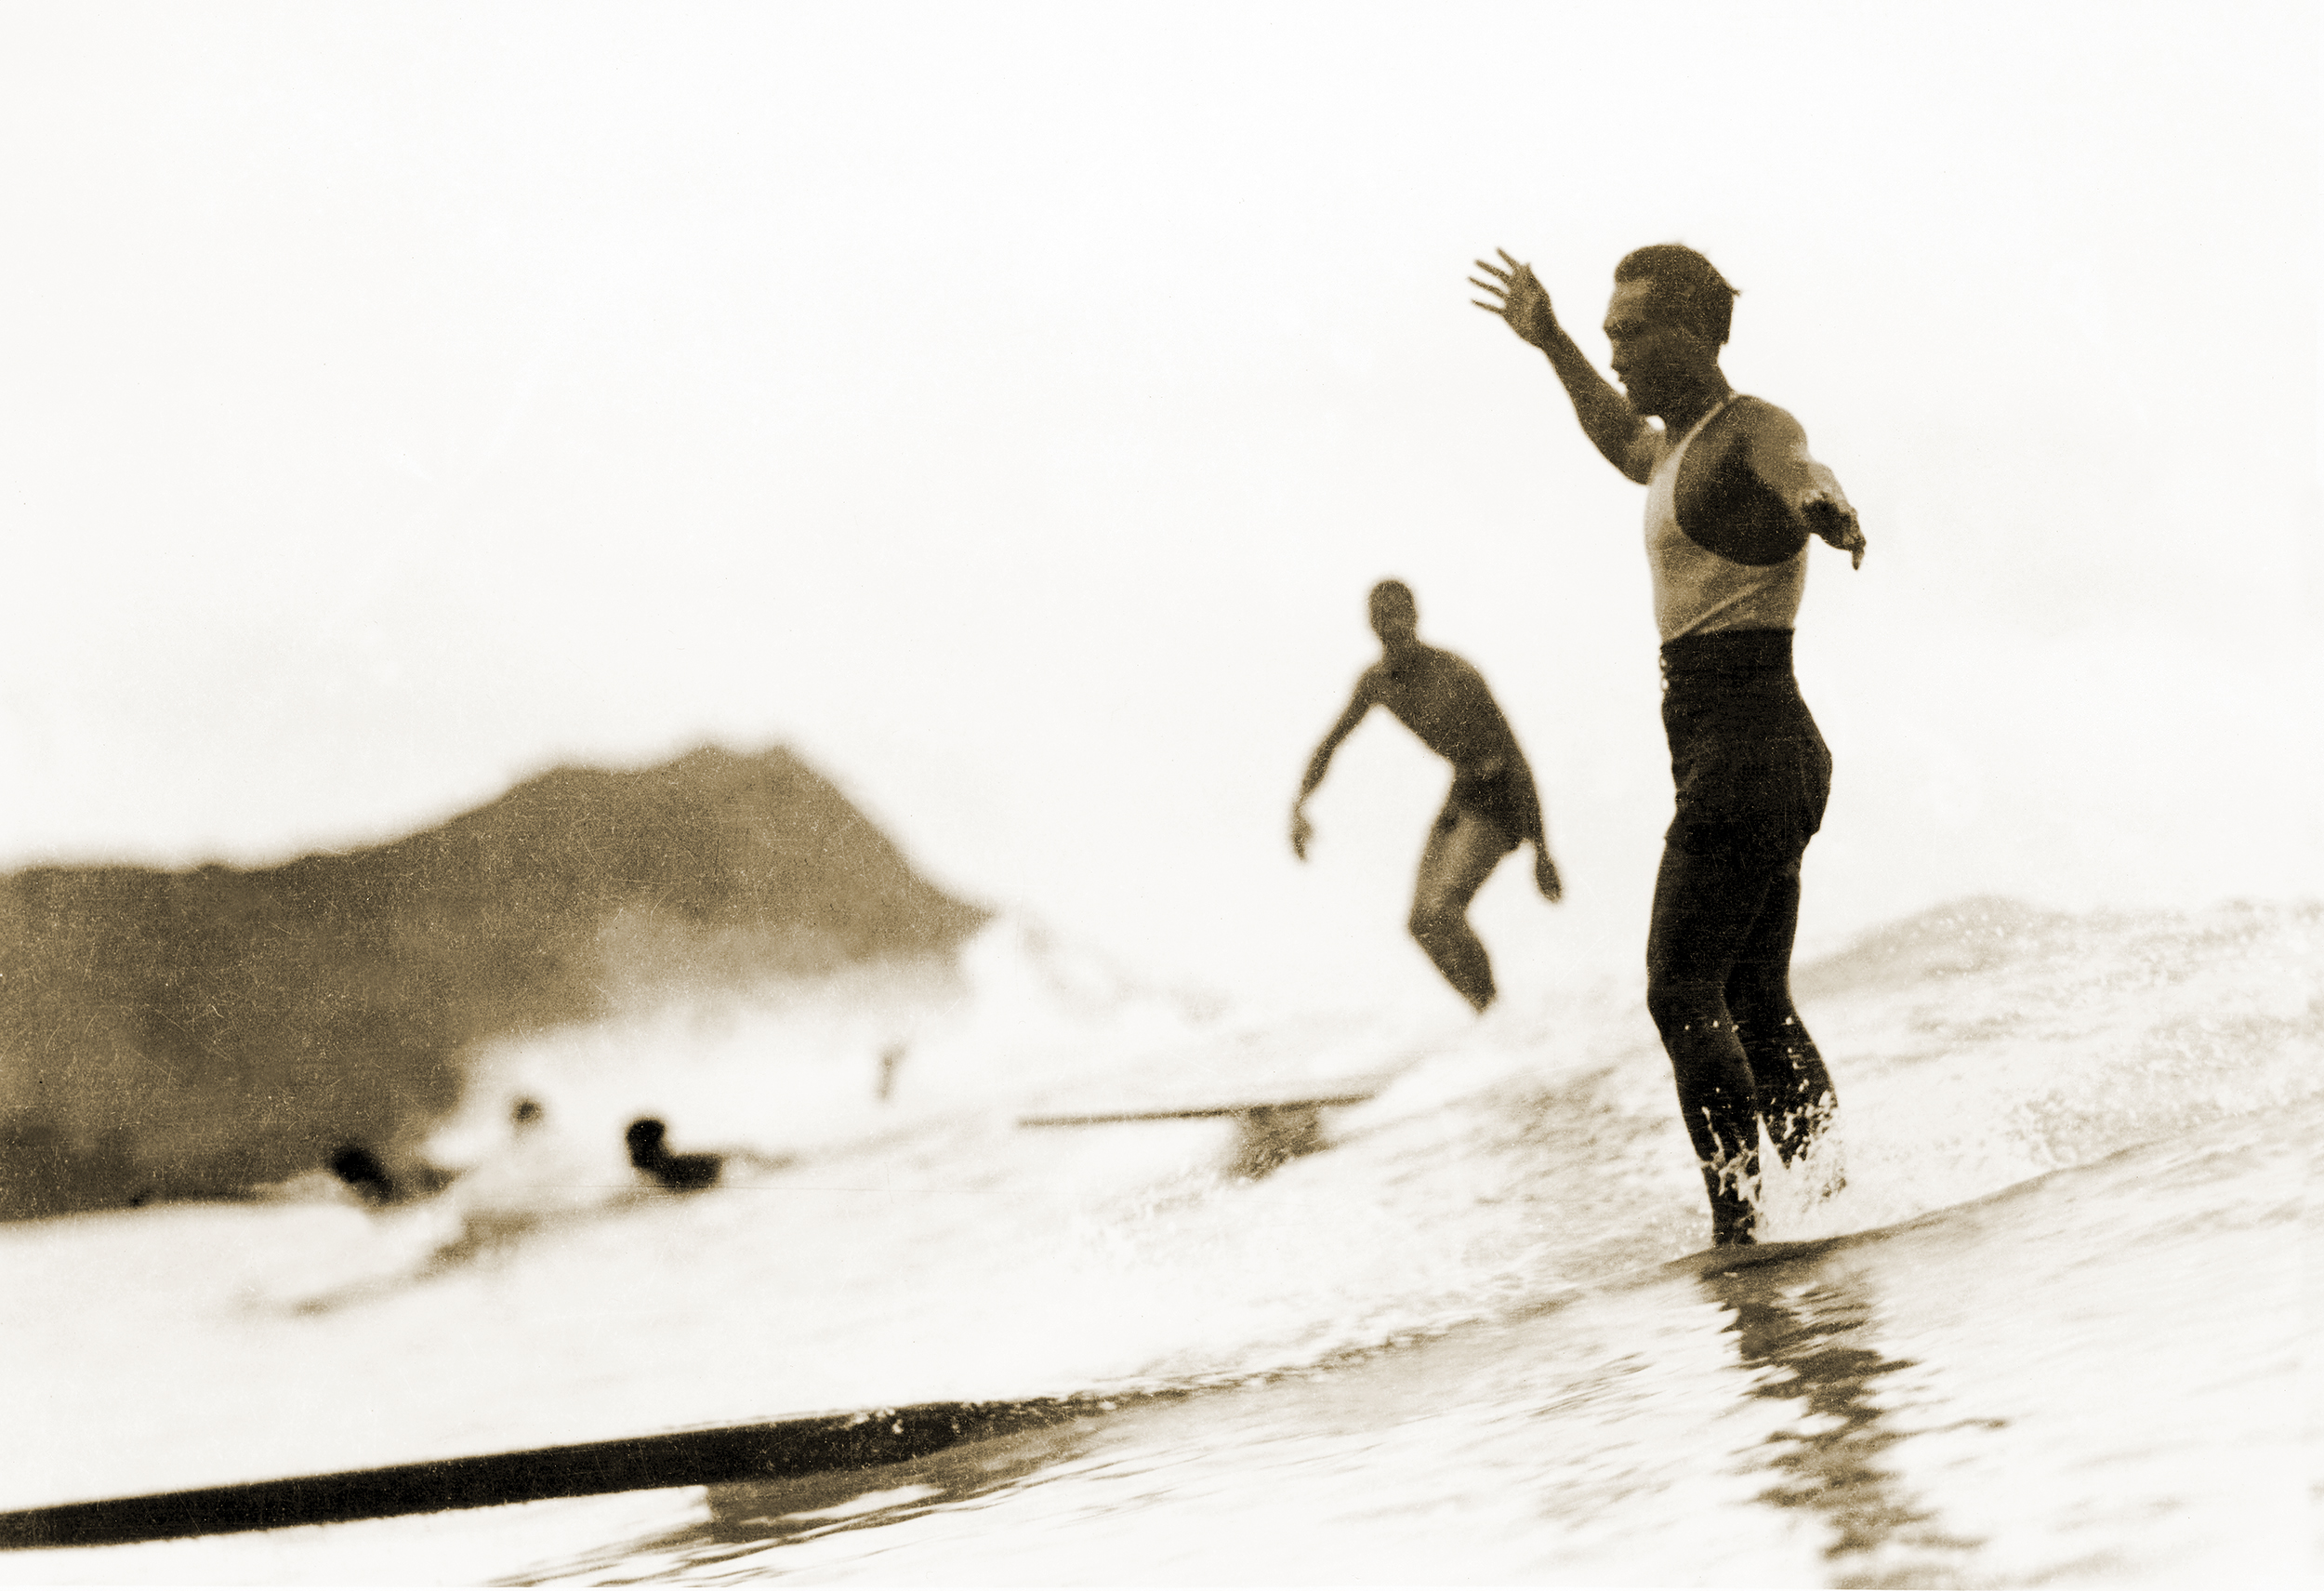 Duke’s Ulcers: How Surfing’s Central Icon Dealt with White Supremacy – Surfline.com Surf News